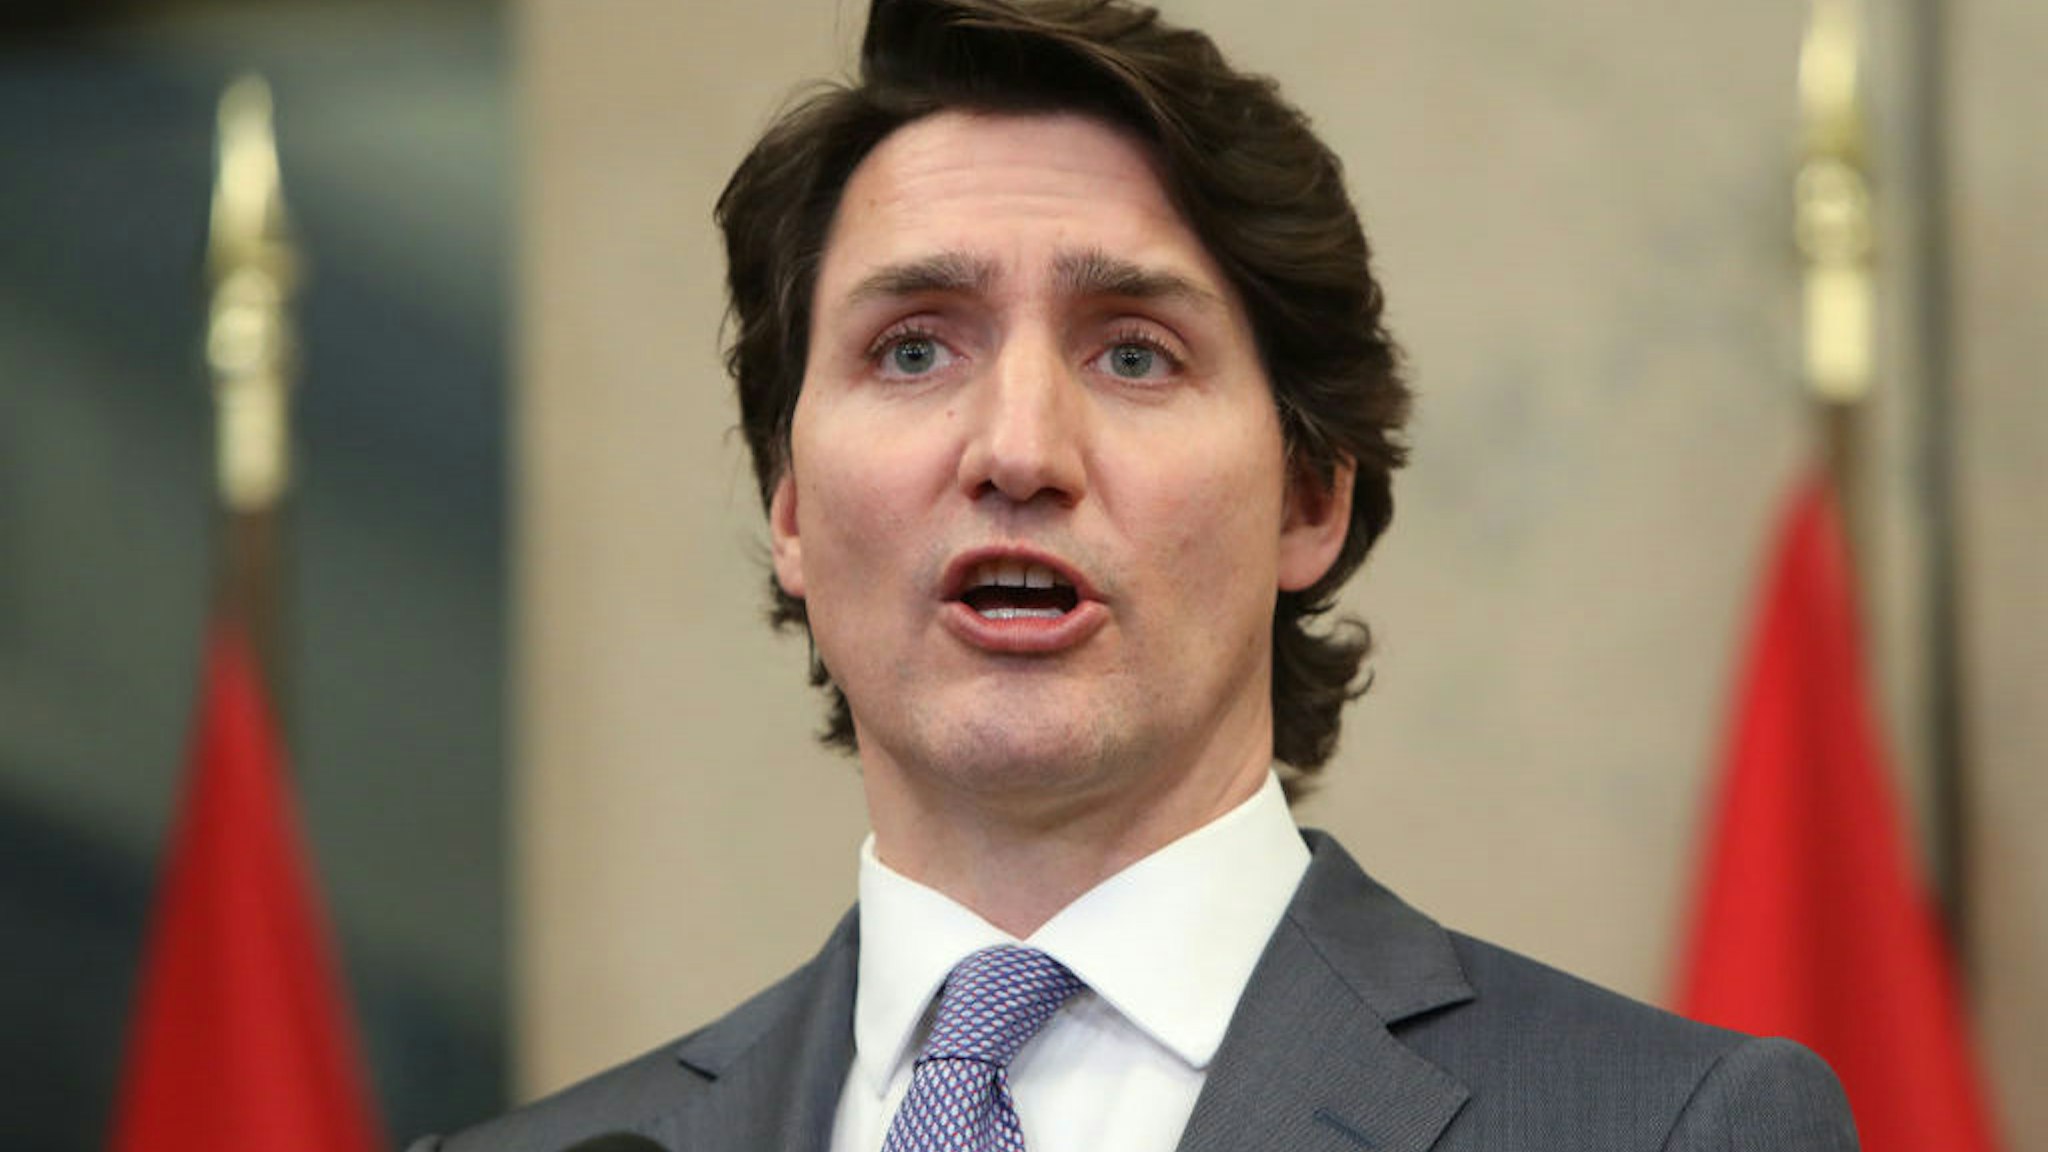 Justin Trudeau, Canada's prime minister, speaks during a news conference in Ottawa, Ontario, Canada, on Wednesday, Jan. 26, 2022. The Canadian government will extend its military training mission in Ukraine until 2025 and immediately add 60 troops to the 200 who are already there, Trudeau said. Photographer: David Kawai/Bloomberg